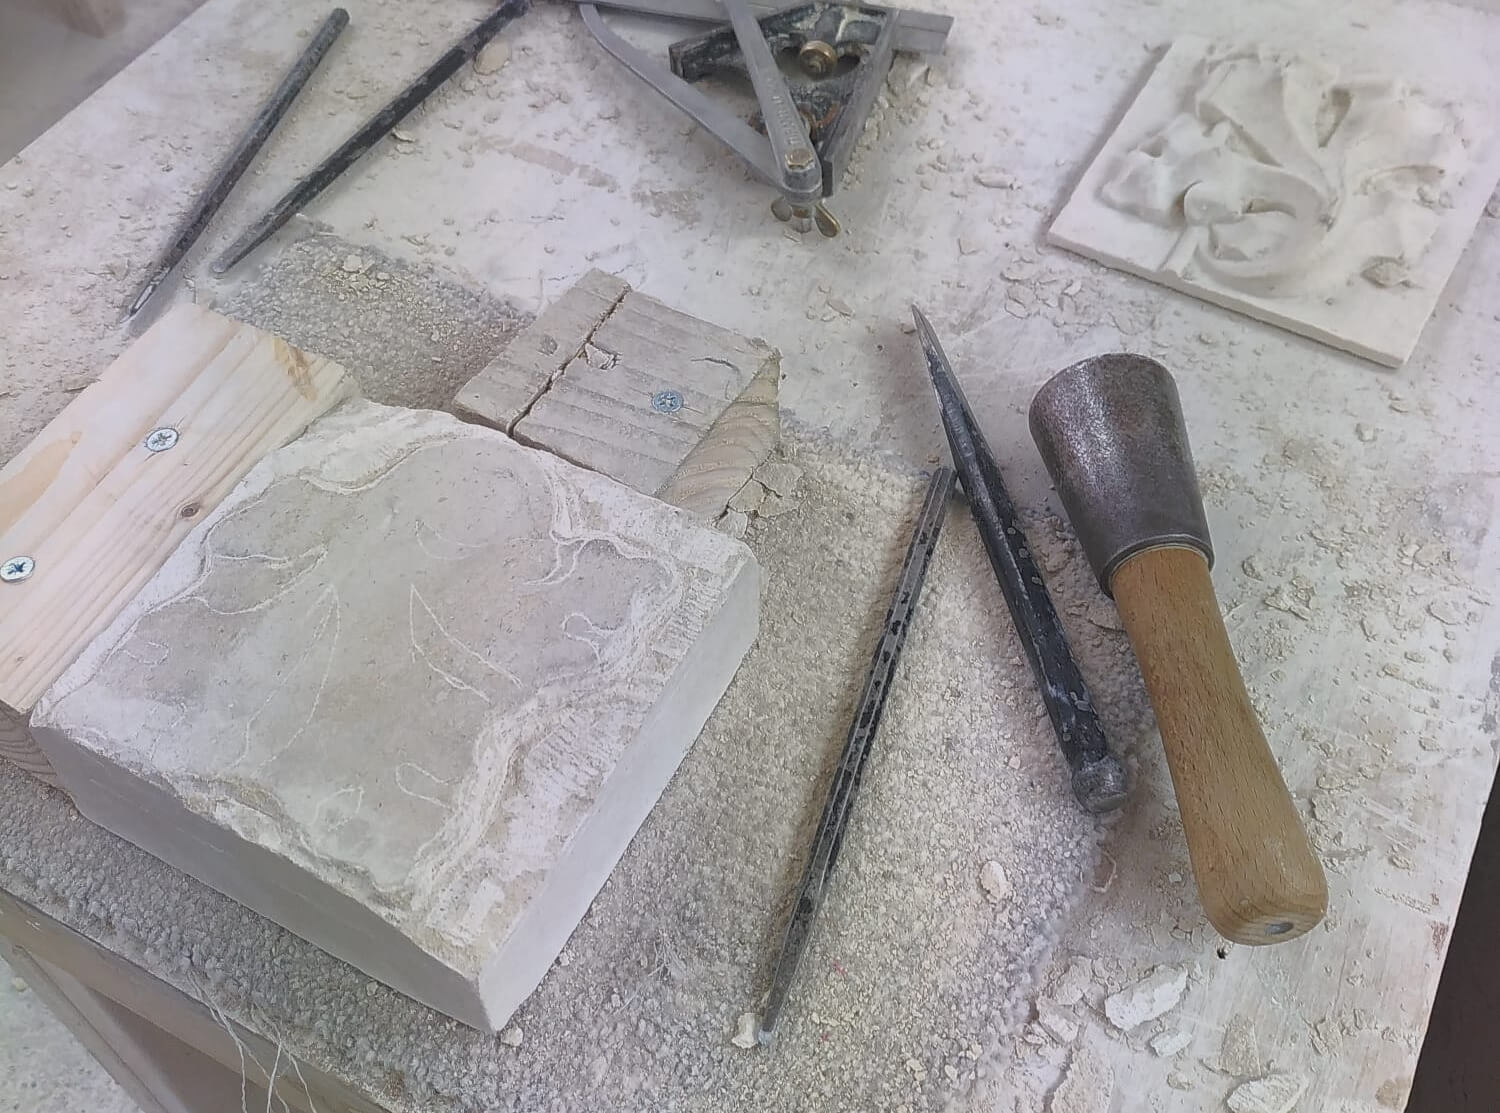 A square lump of Portland stone, a mallet, some chisels, and a relief tile with a gothic oak leaf design, sit on a dusty workbench.